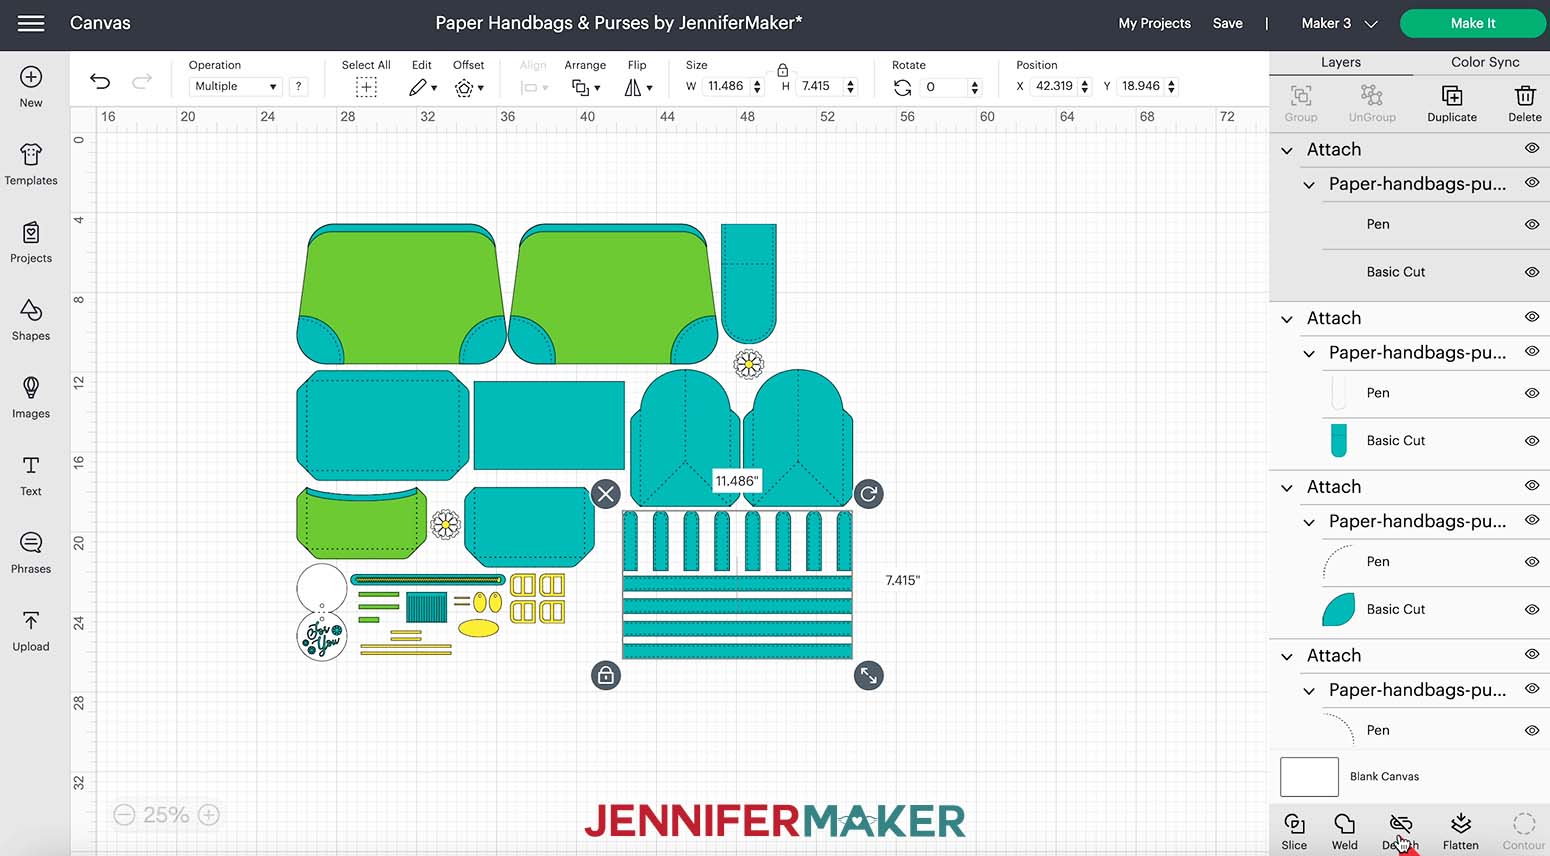 A screenshot showing the Flower Power paper handbag design on the Cricut Design Space canvas with the Pen and Basic Cut layers for the handle pieces highlighted and attached